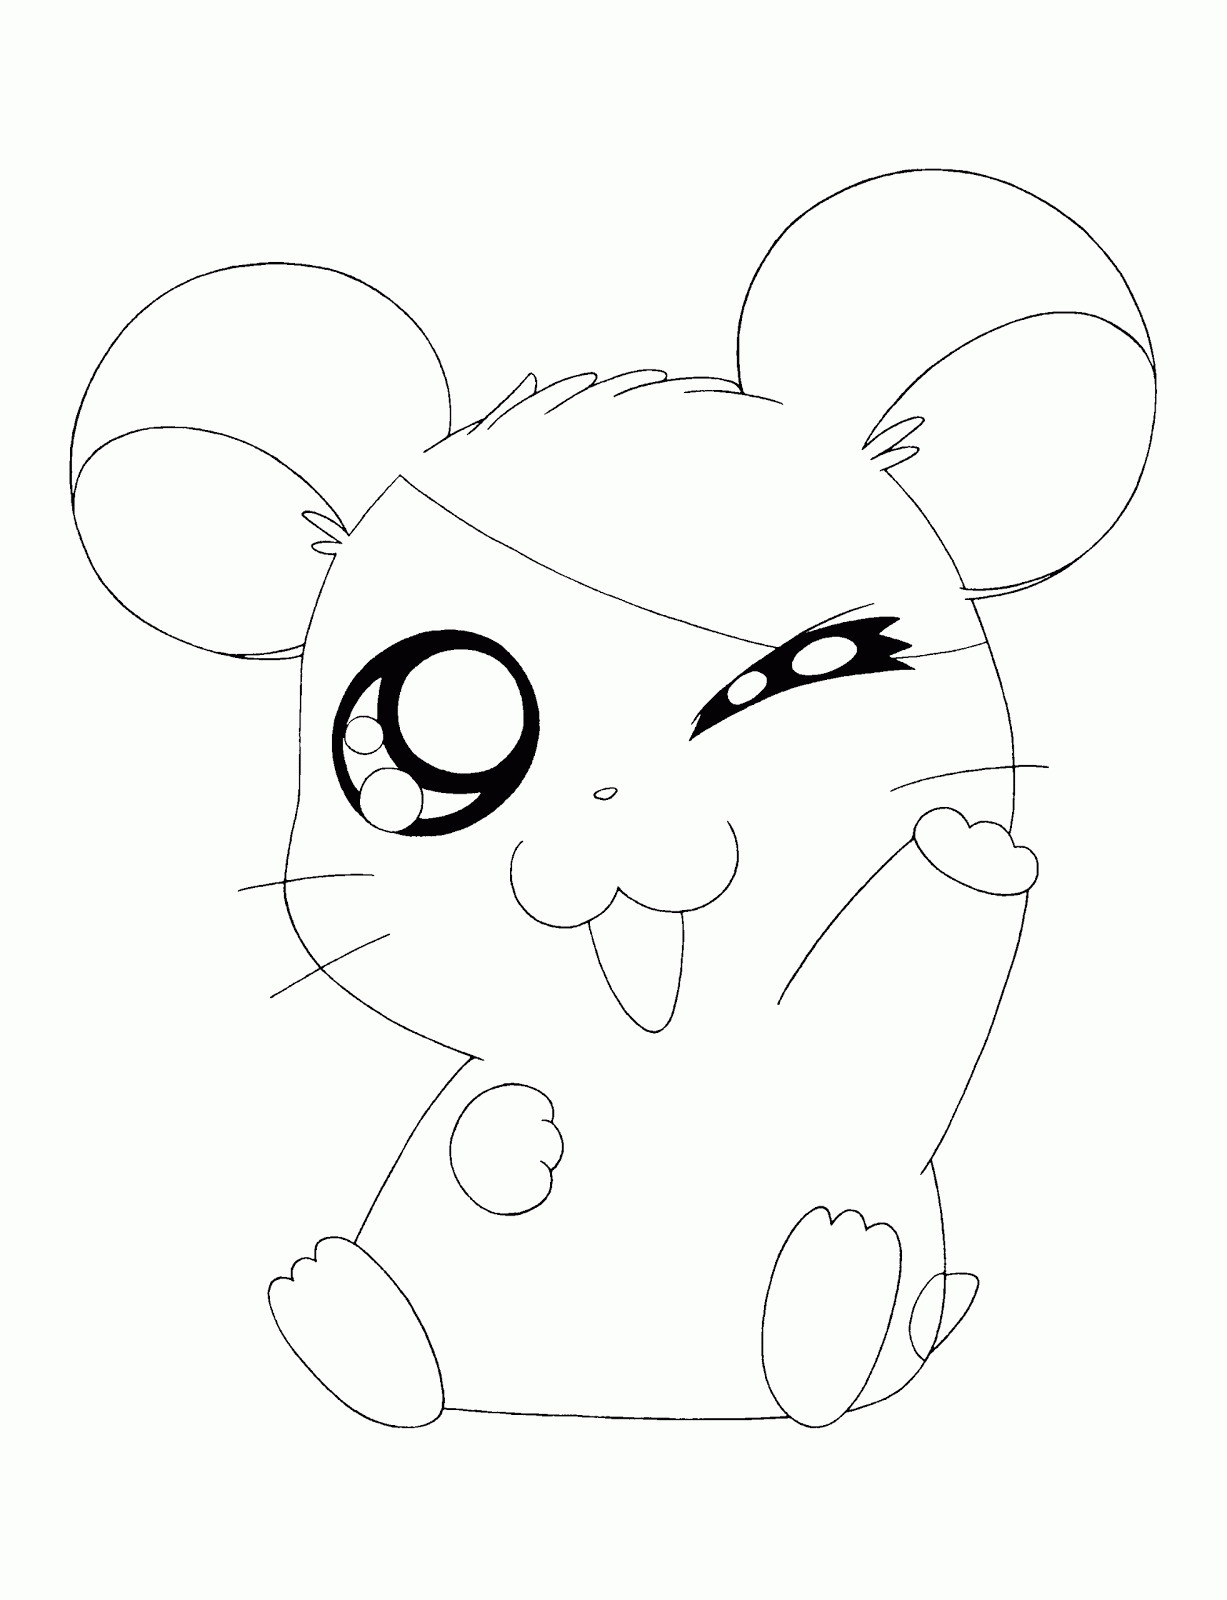 Cartoon Character Animals Coloring Pages - Coloring Pages For All Ages